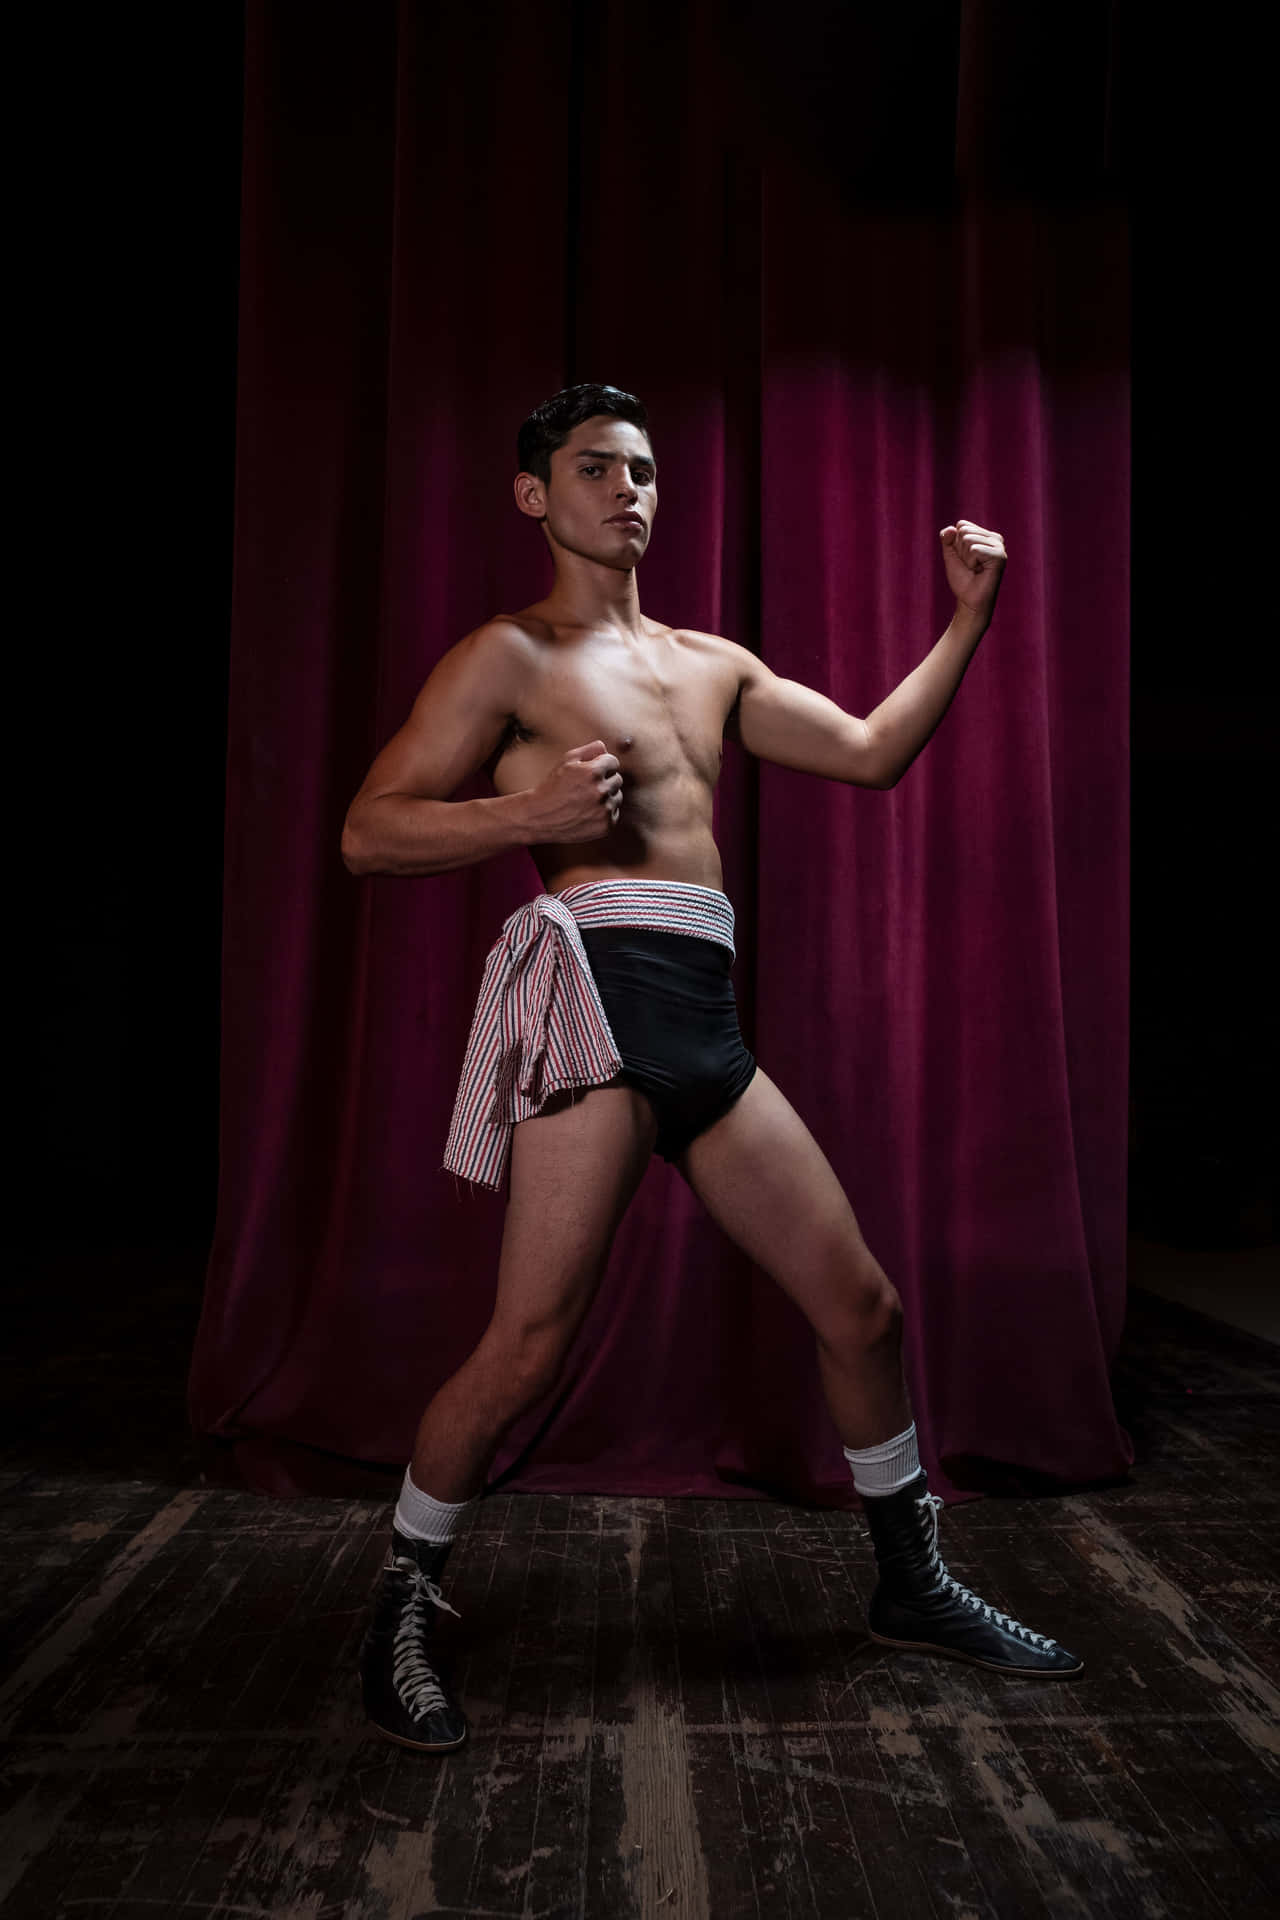 A Man In Boxing Shorts Posing For A Photo Wallpaper